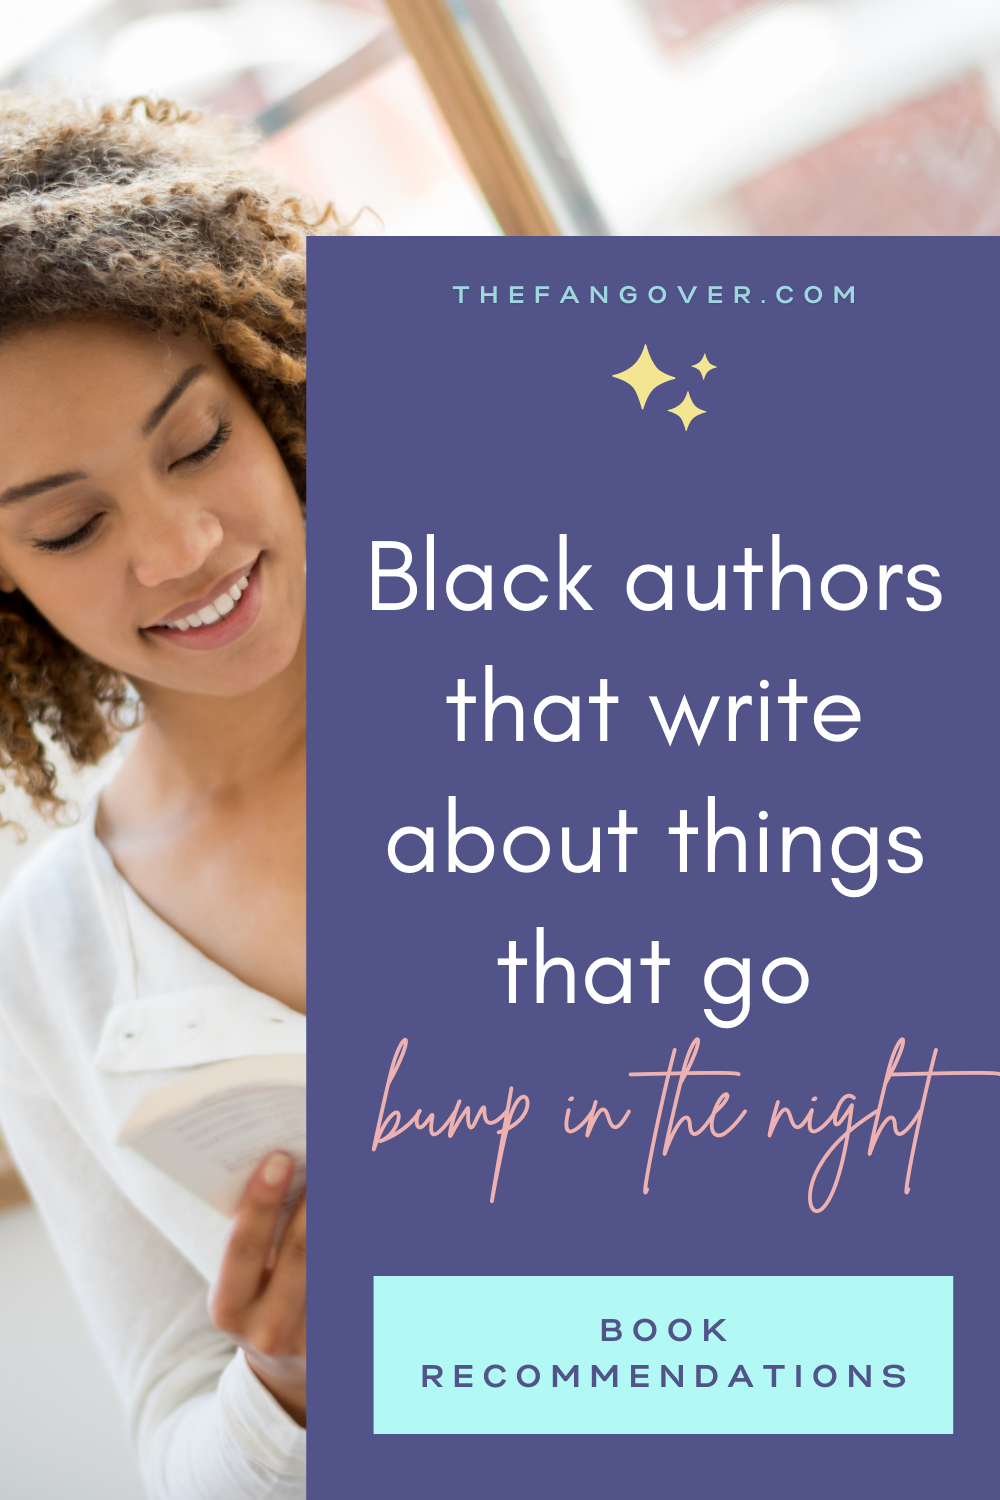 Black Authors that Write the Paranormal